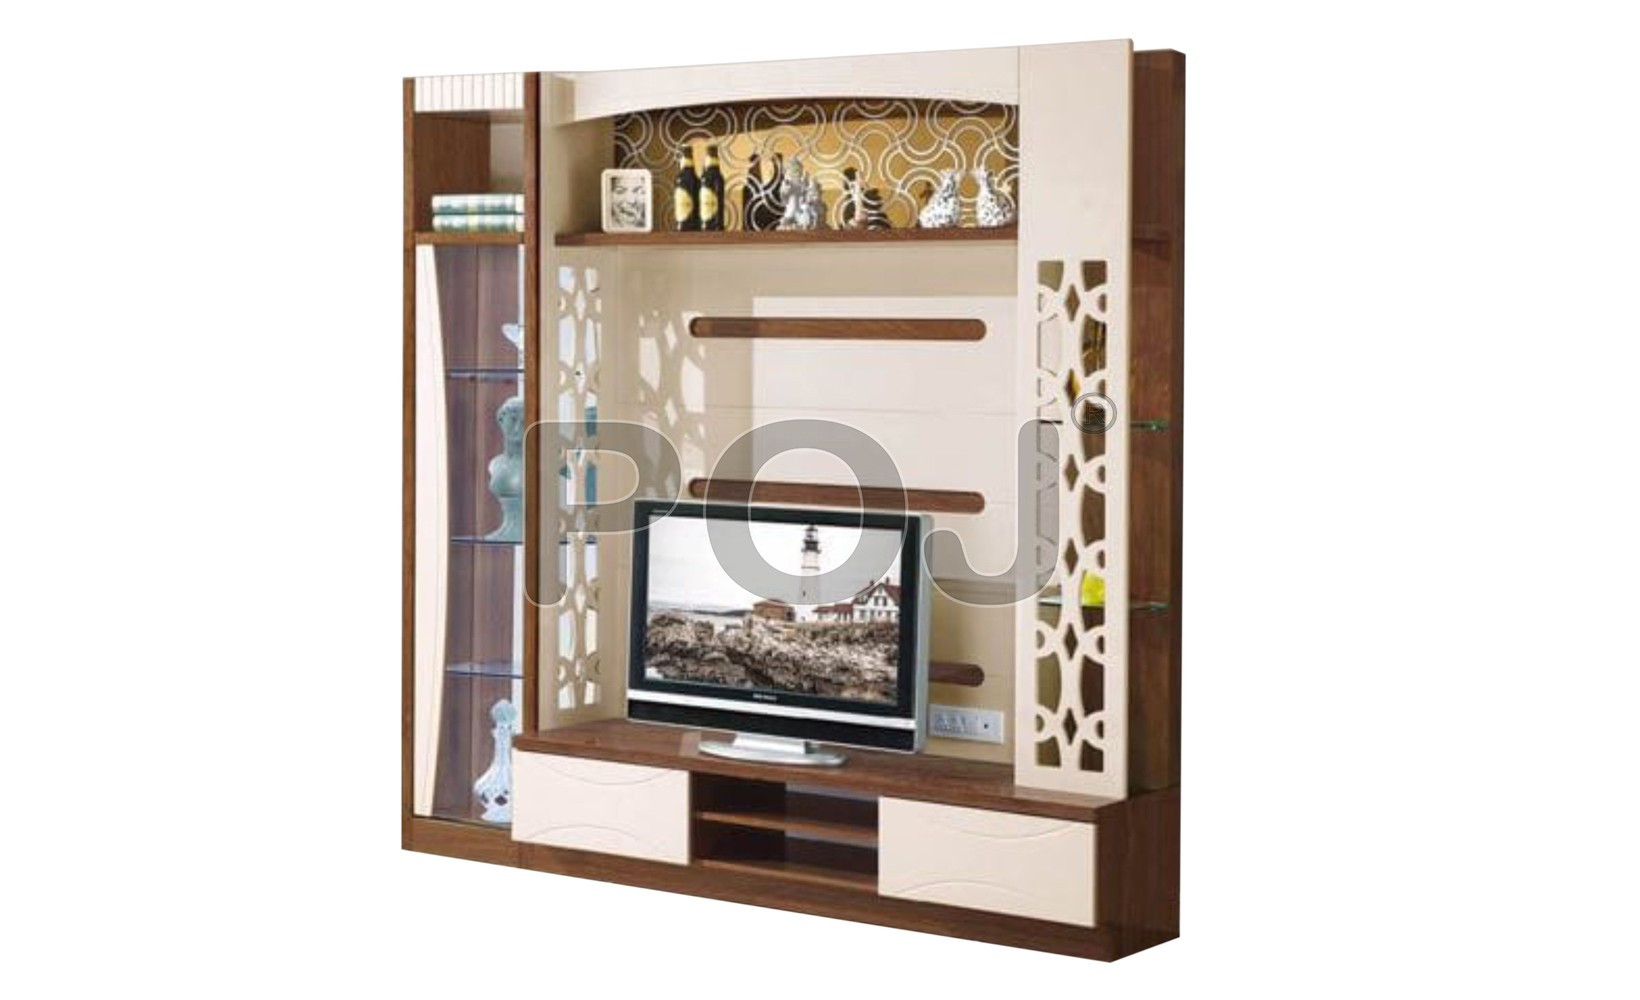 Buy Unison Wall Unit Online at Best Prices in Jharkhand, Bihar ...